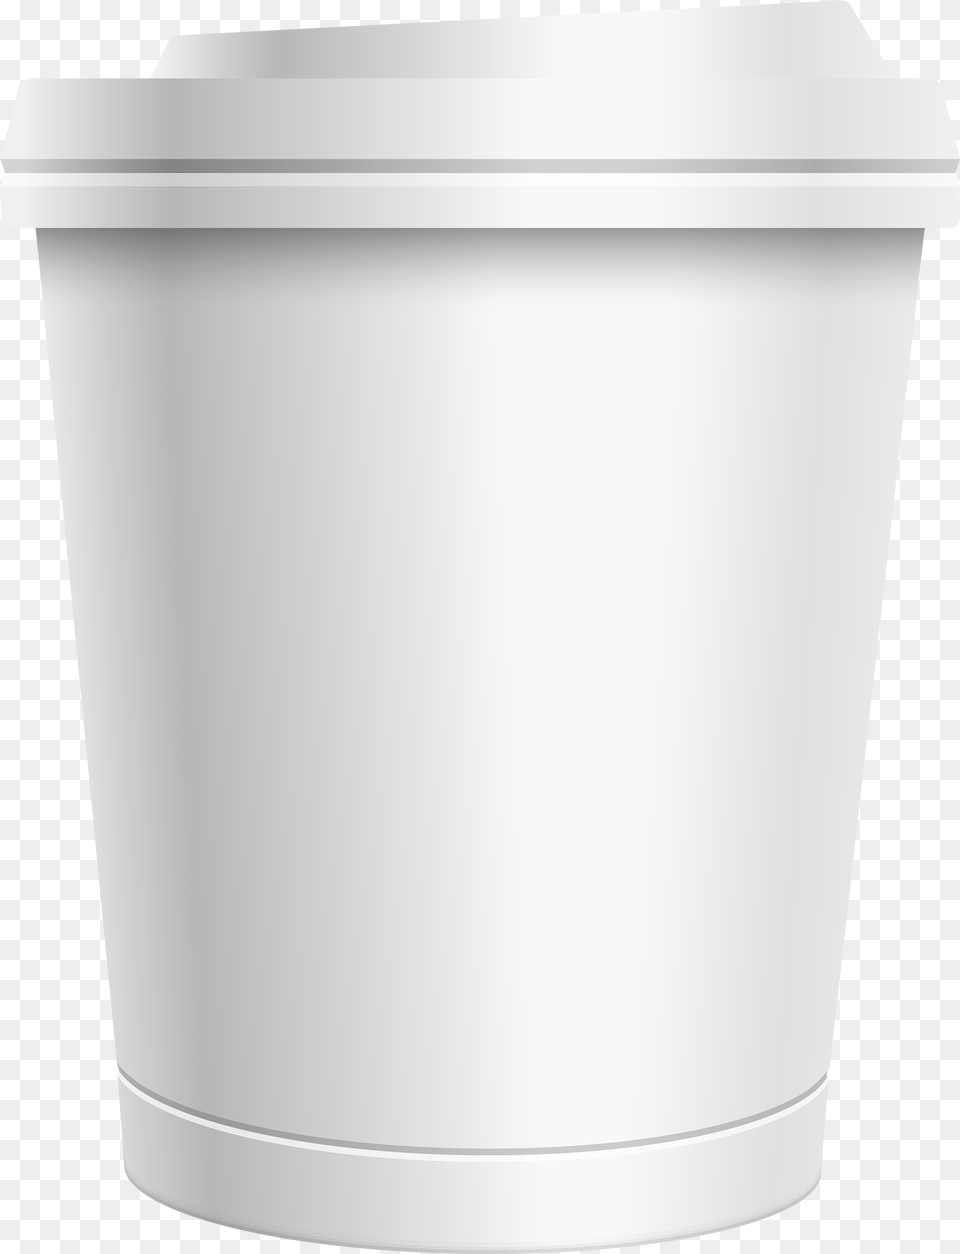 White Coffee Cups Clipart Images Clip Art Juice Plastic Coffee Cup, Mailbox, Bowl Free Transparent Png